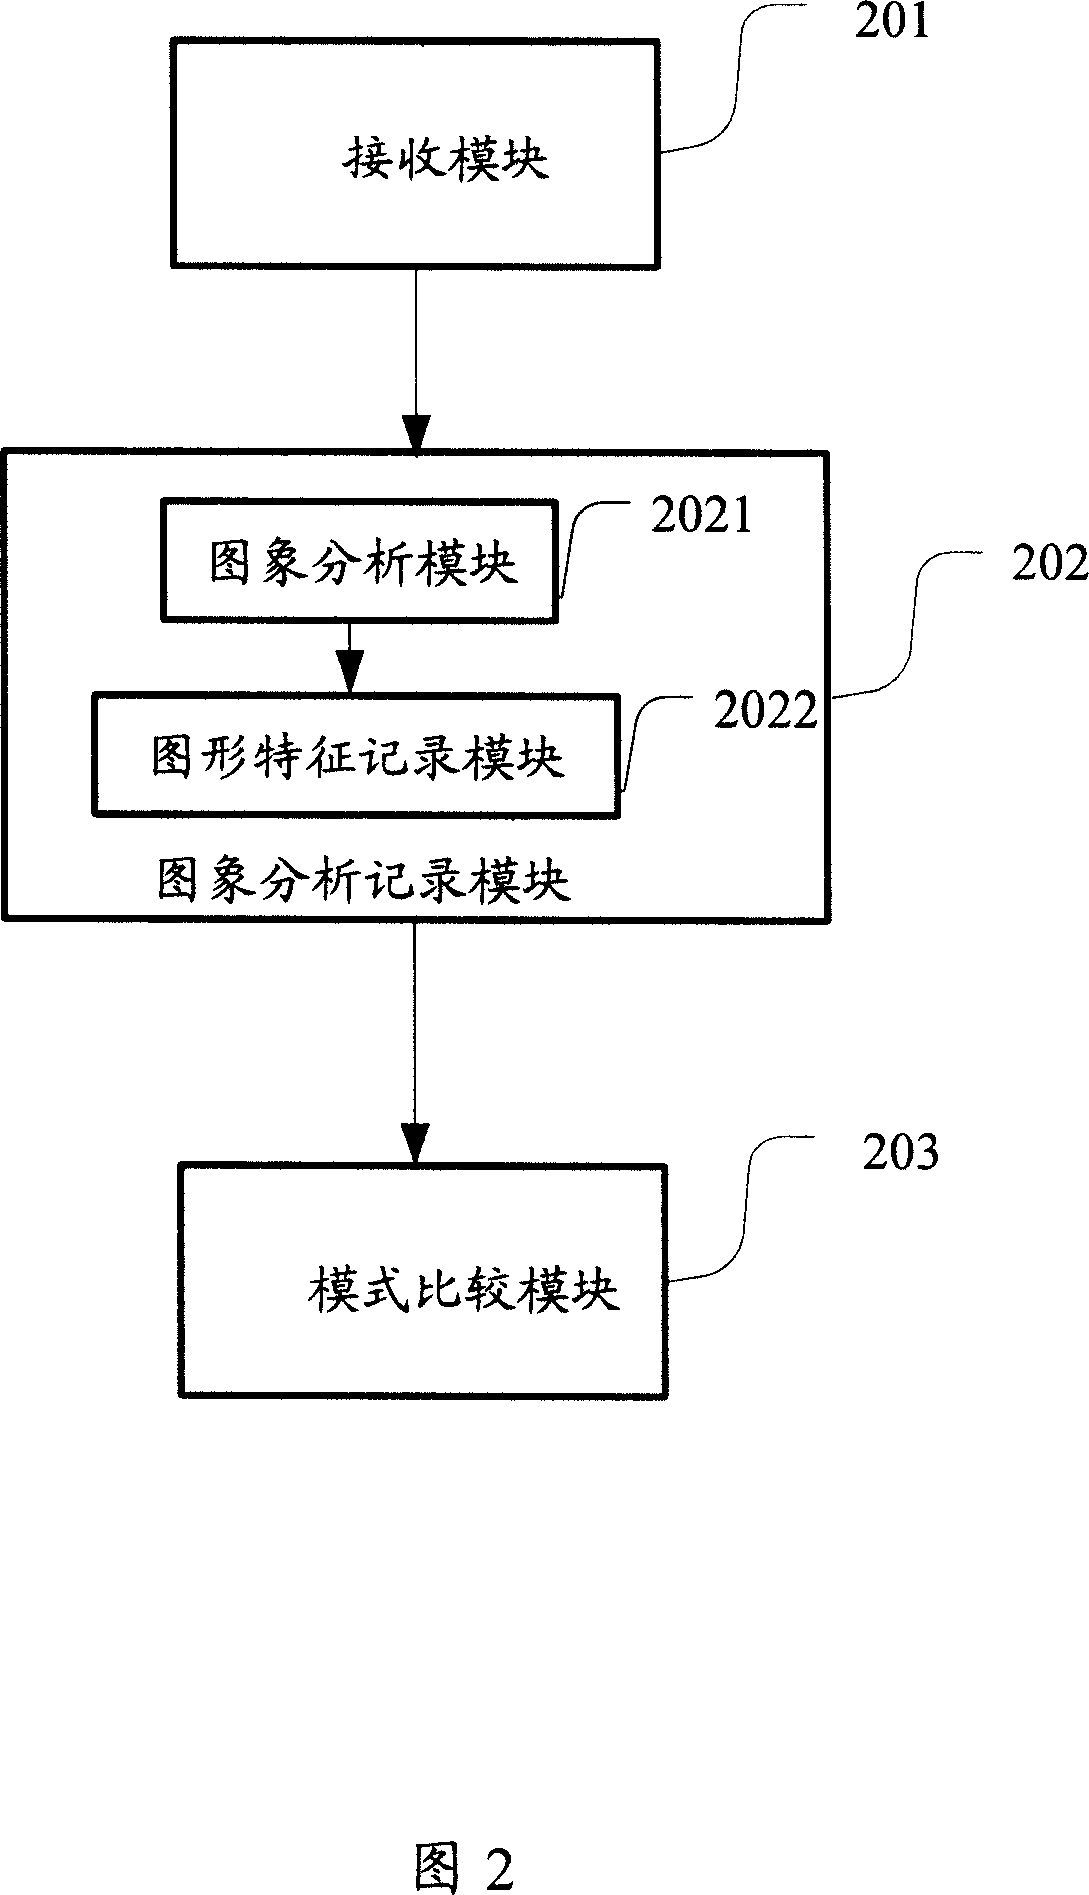 Method and system for searching image based on key graph as search condition